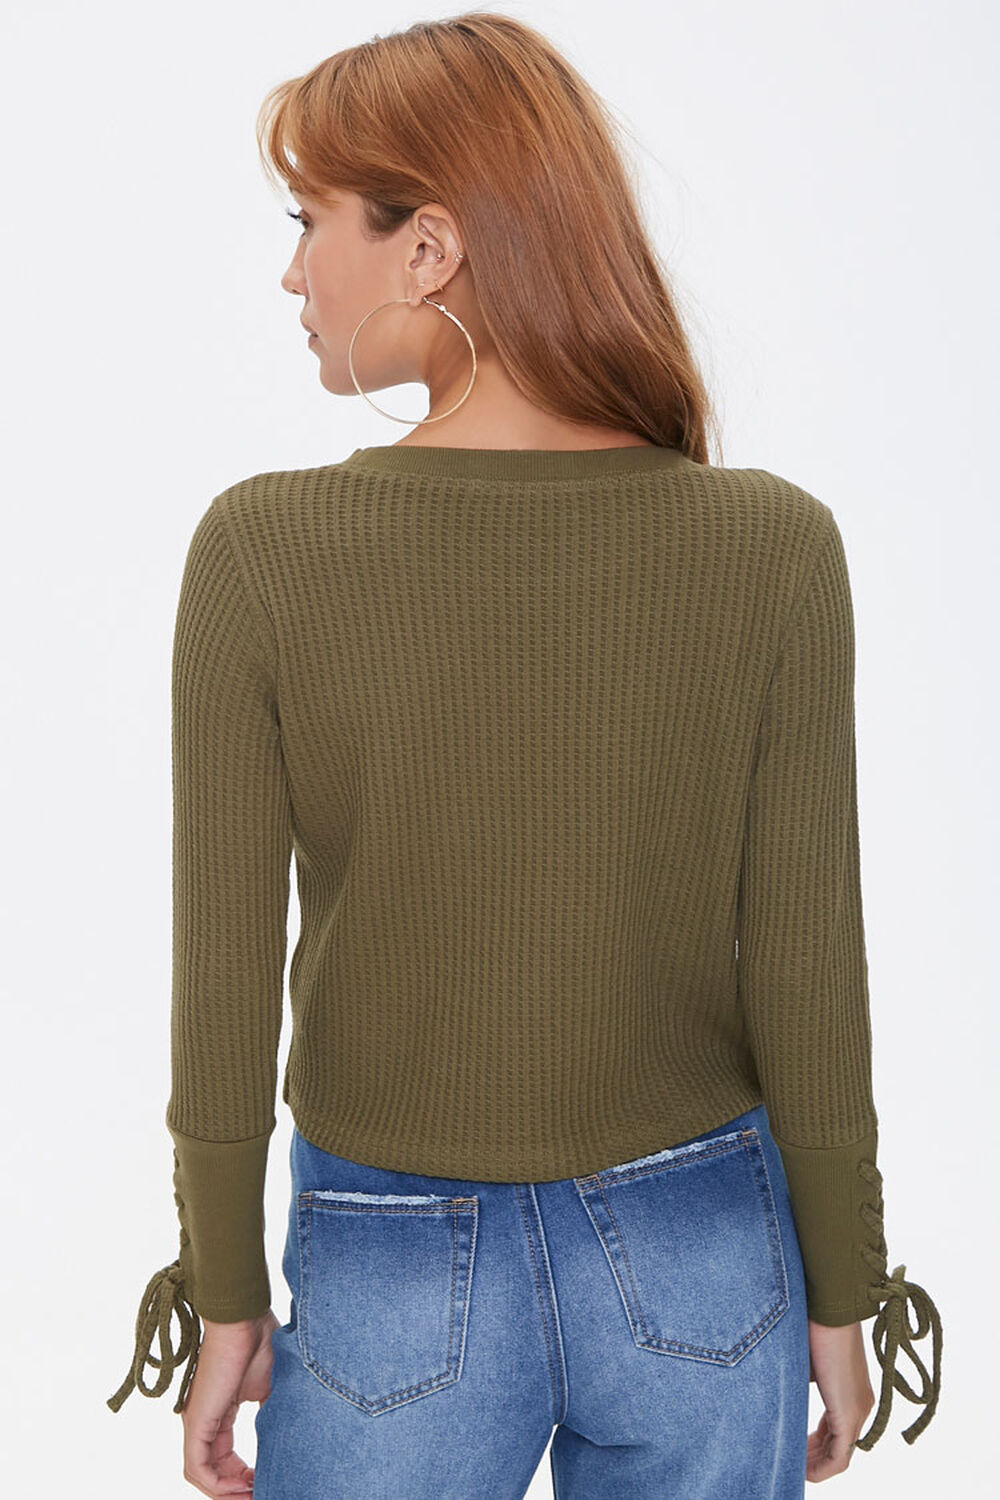 OLIVE Lace-Up Waffle Knit Top, image 3